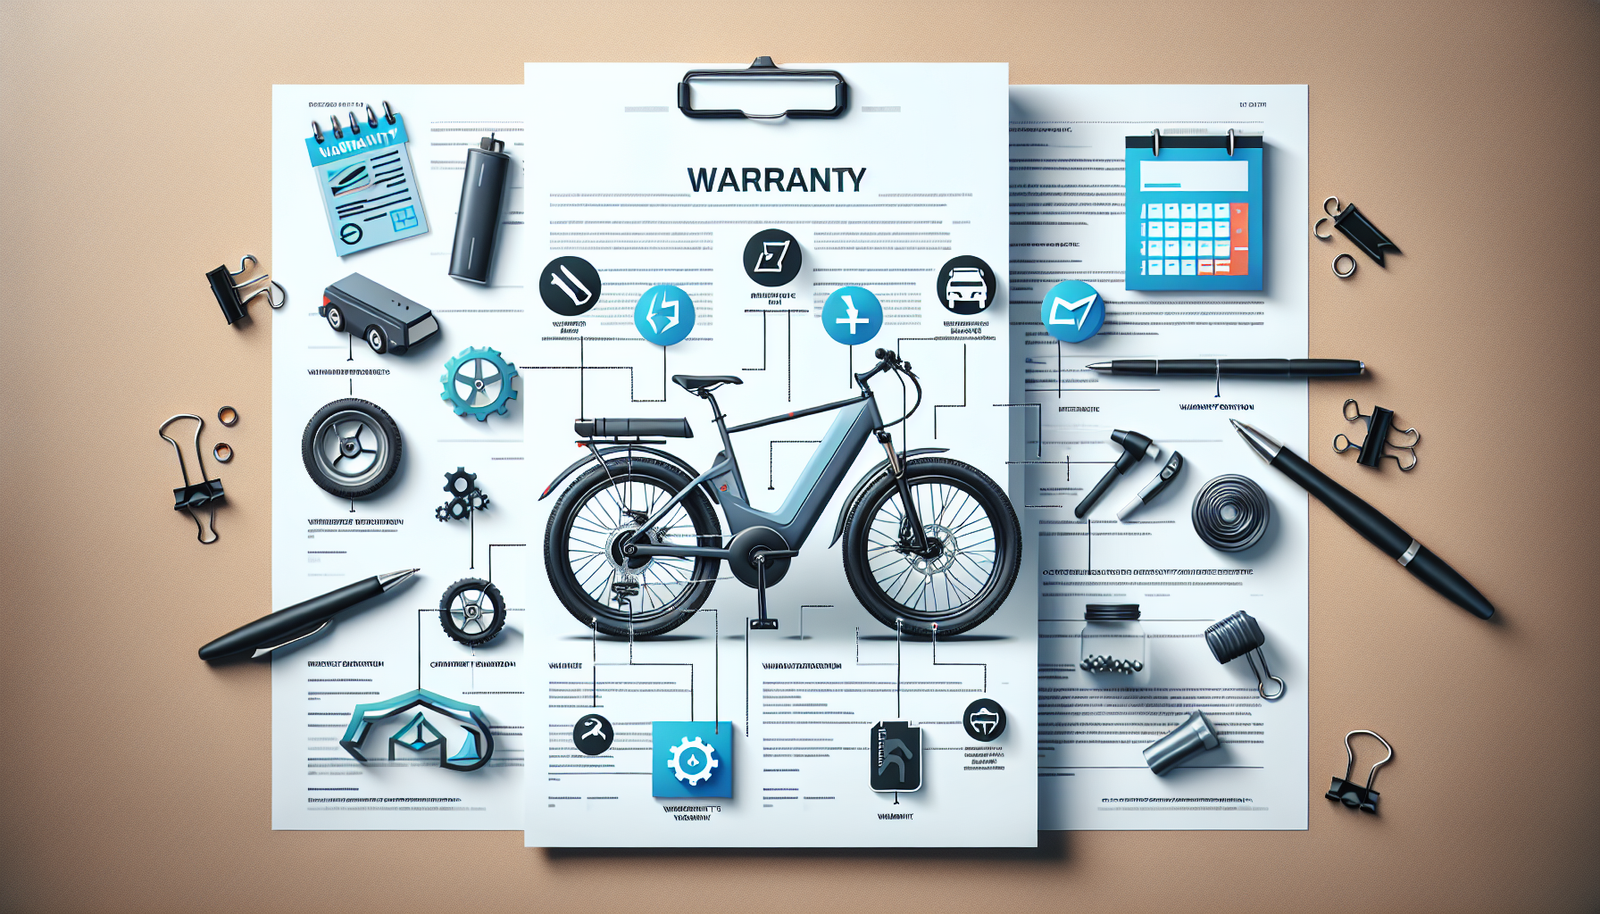 What Kind Of Warranty Do Electric Bikes Typically Come With?